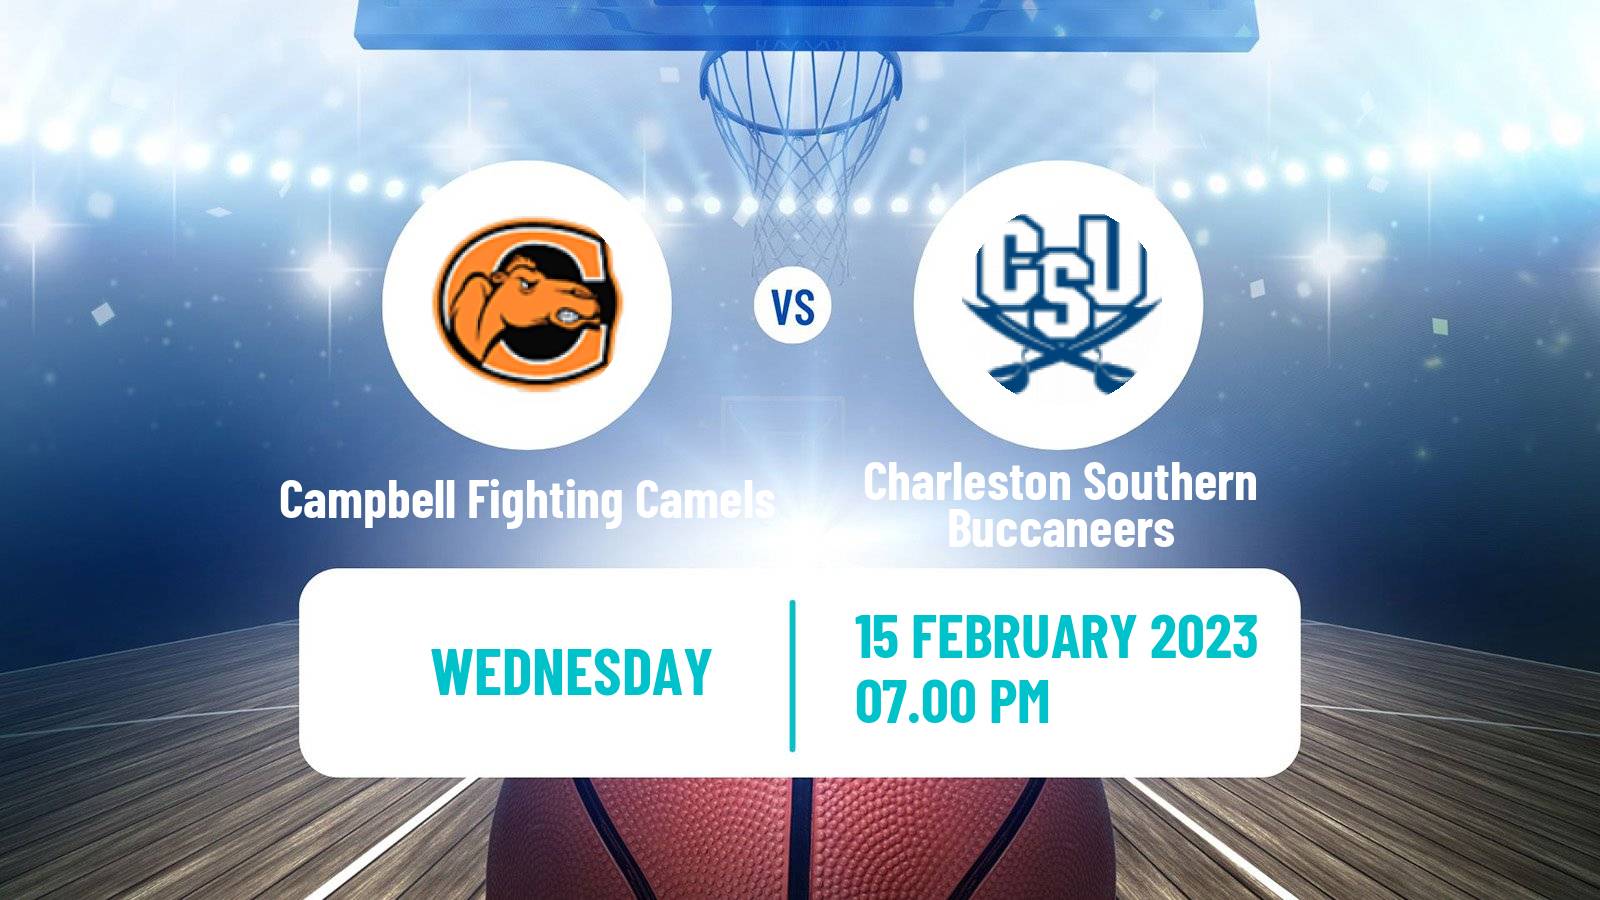 Basketball NCAA College Basketball Campbell Fighting Camels - Charleston Southern Buccaneers